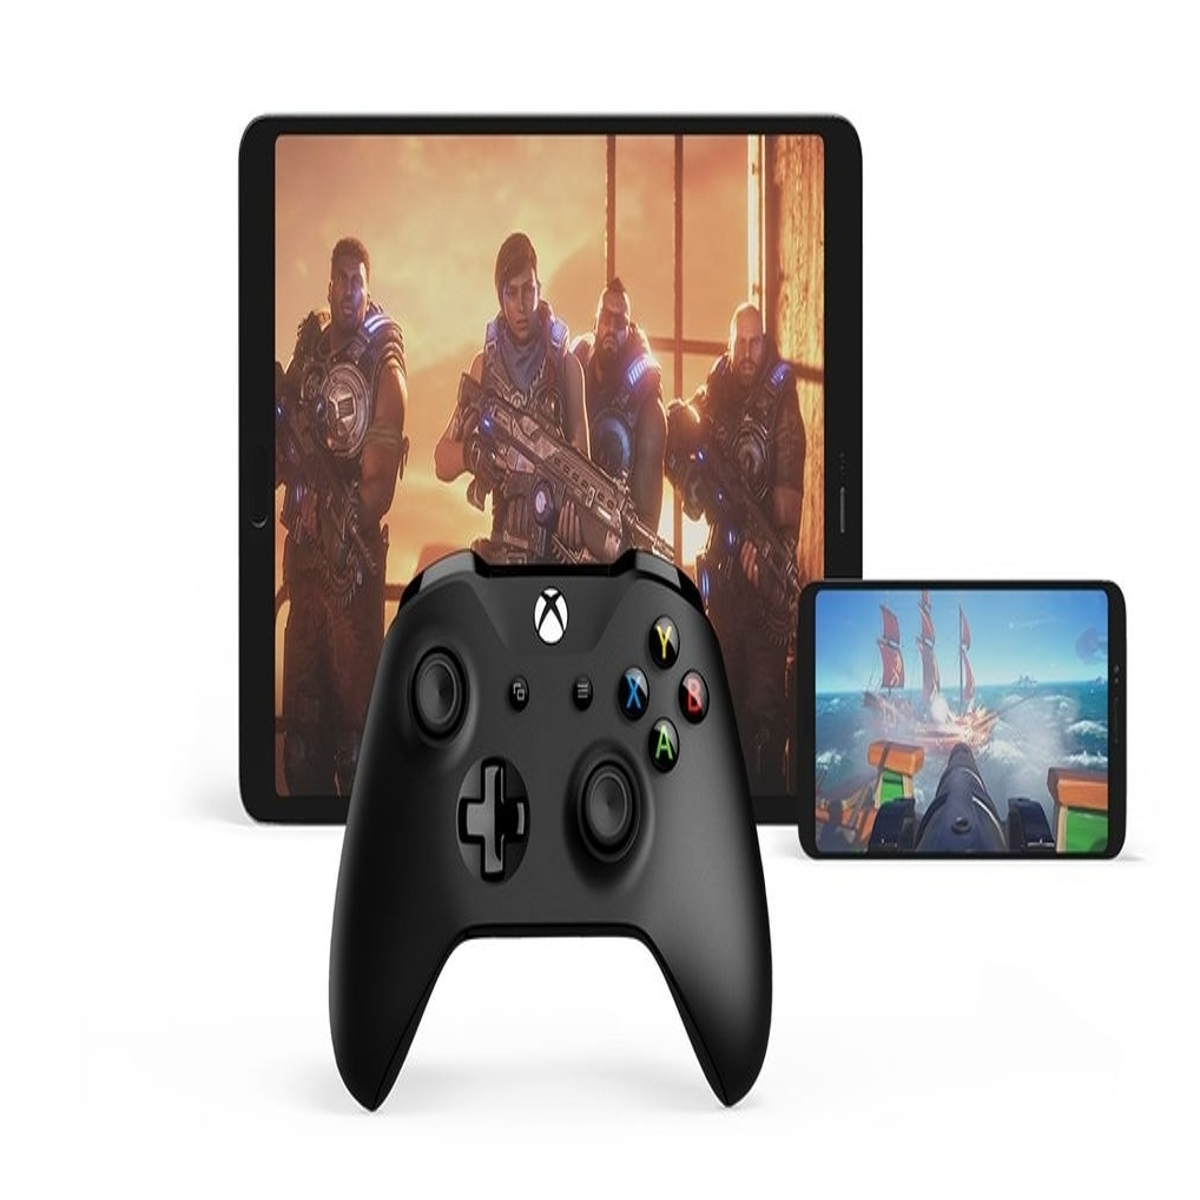 How to use Xbox Game Pass for Android (xCloud) on Android TV